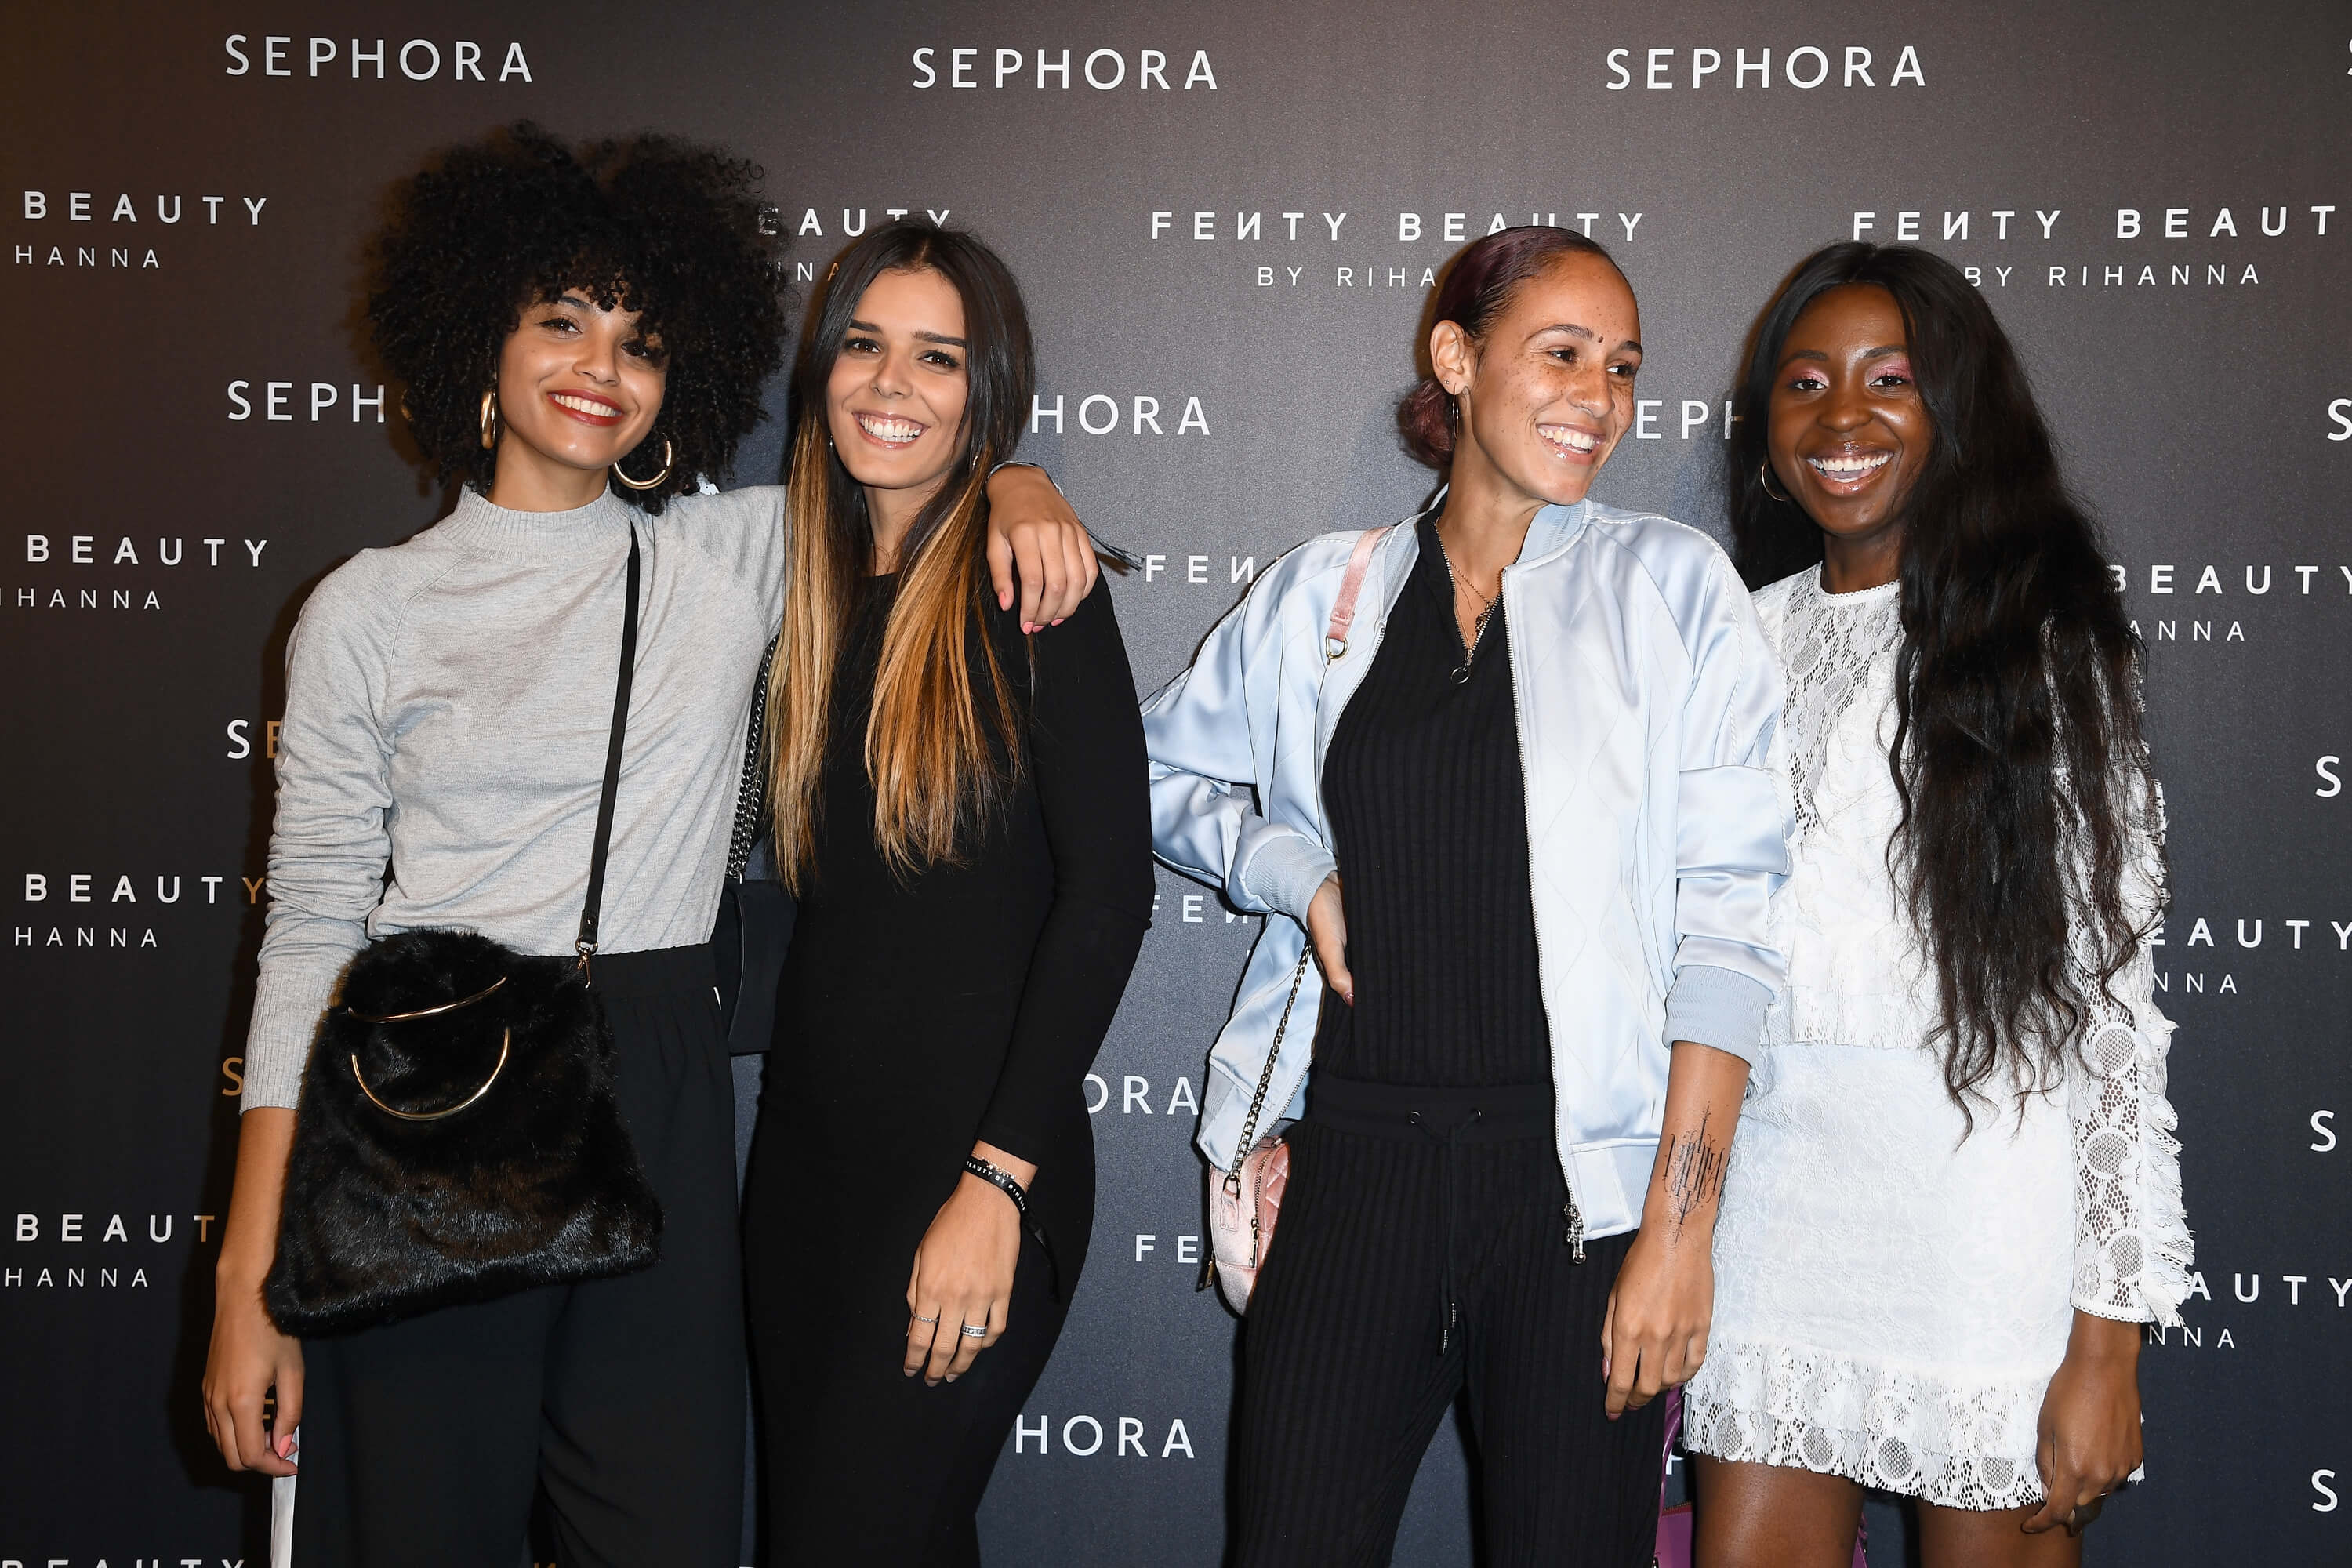 PARIS, FRANCE - SEPTEMBER 21:  (L-R)  Influencers Syanafromparis, Justinevrgr,  Herapradel and Signecatseyes  attend the Fenty Beauty By Rihanna Paris Launch Party hosted by Sephora at Jardin des Tuileries on September 21, 2017 in Paris, France.  (Photo by Pascal Le Segretain/Getty Images for Fenty Beauty) *** Local Caption *** Syanafromparis; Justinevrgr; Herapradel; Signecatseyes